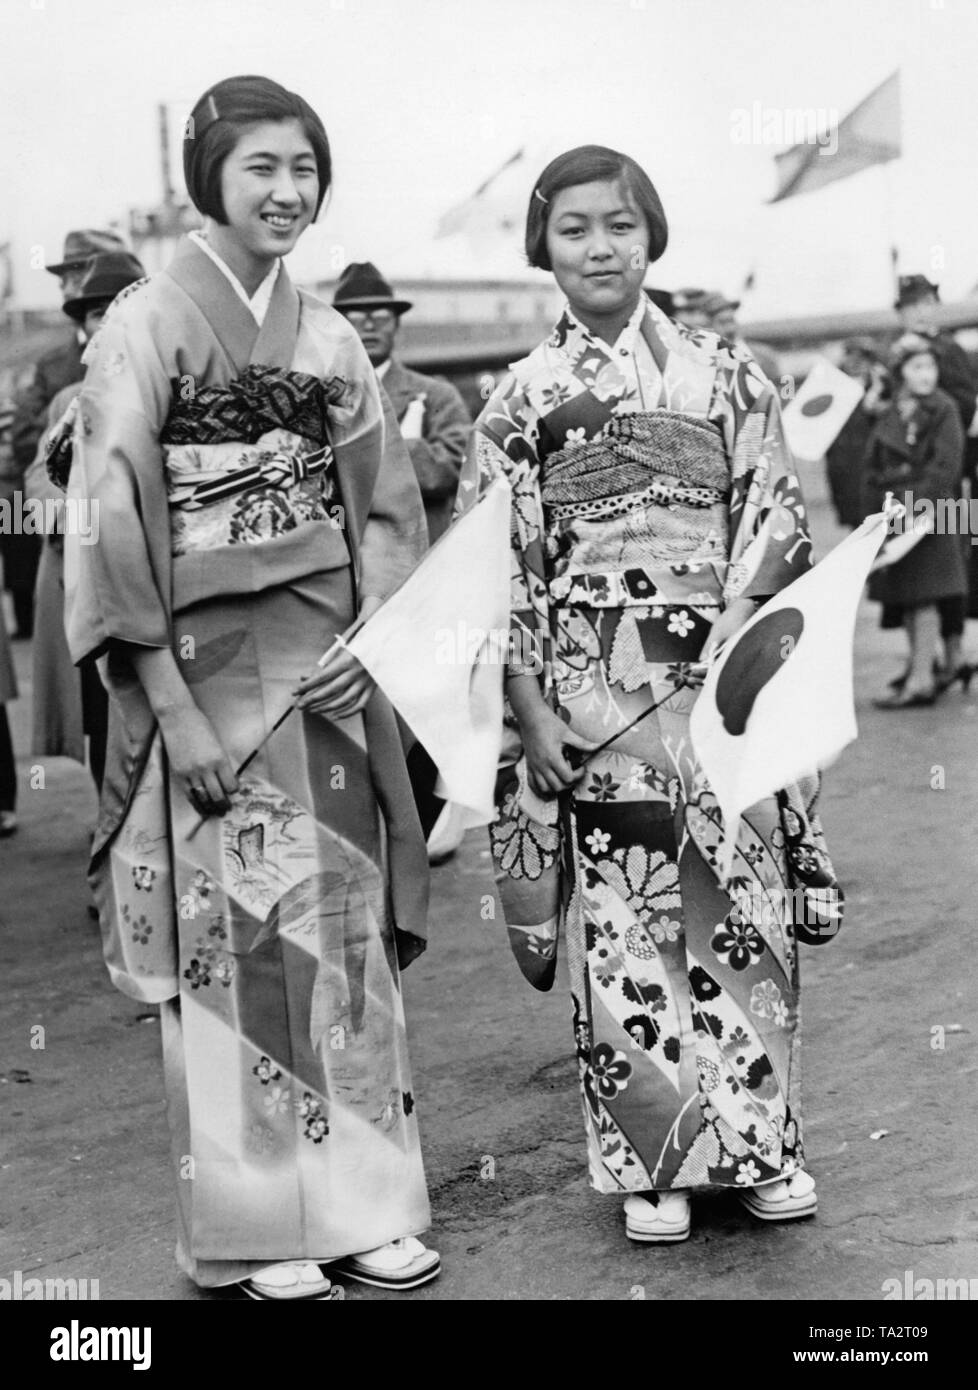 Two young women in kimono with Japanese national flags. Stock Photo